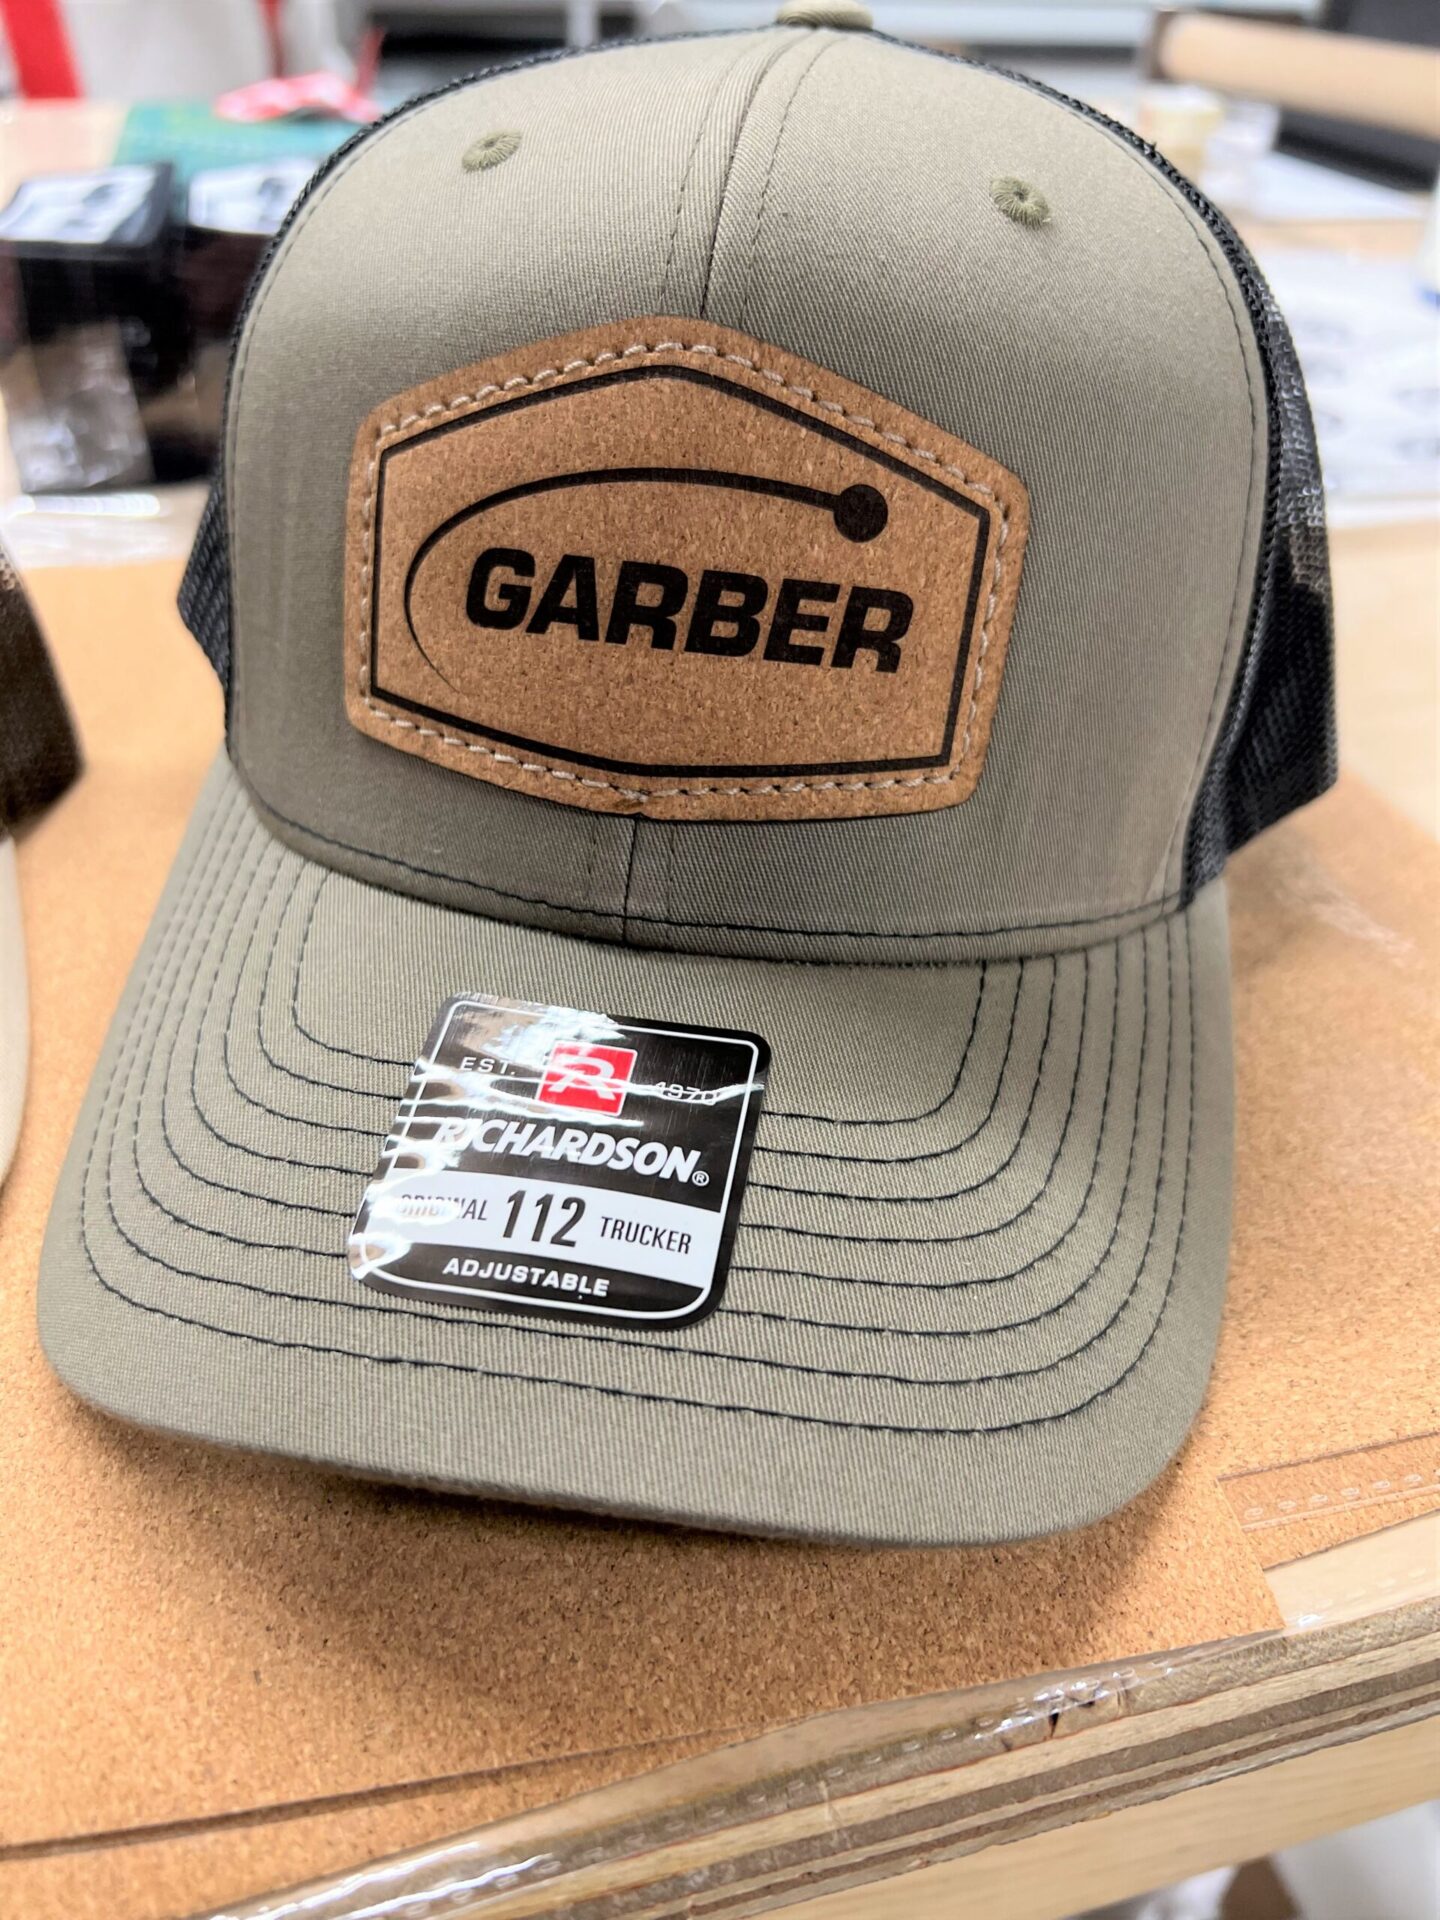 Customized Cork Patches on Trucker Hats